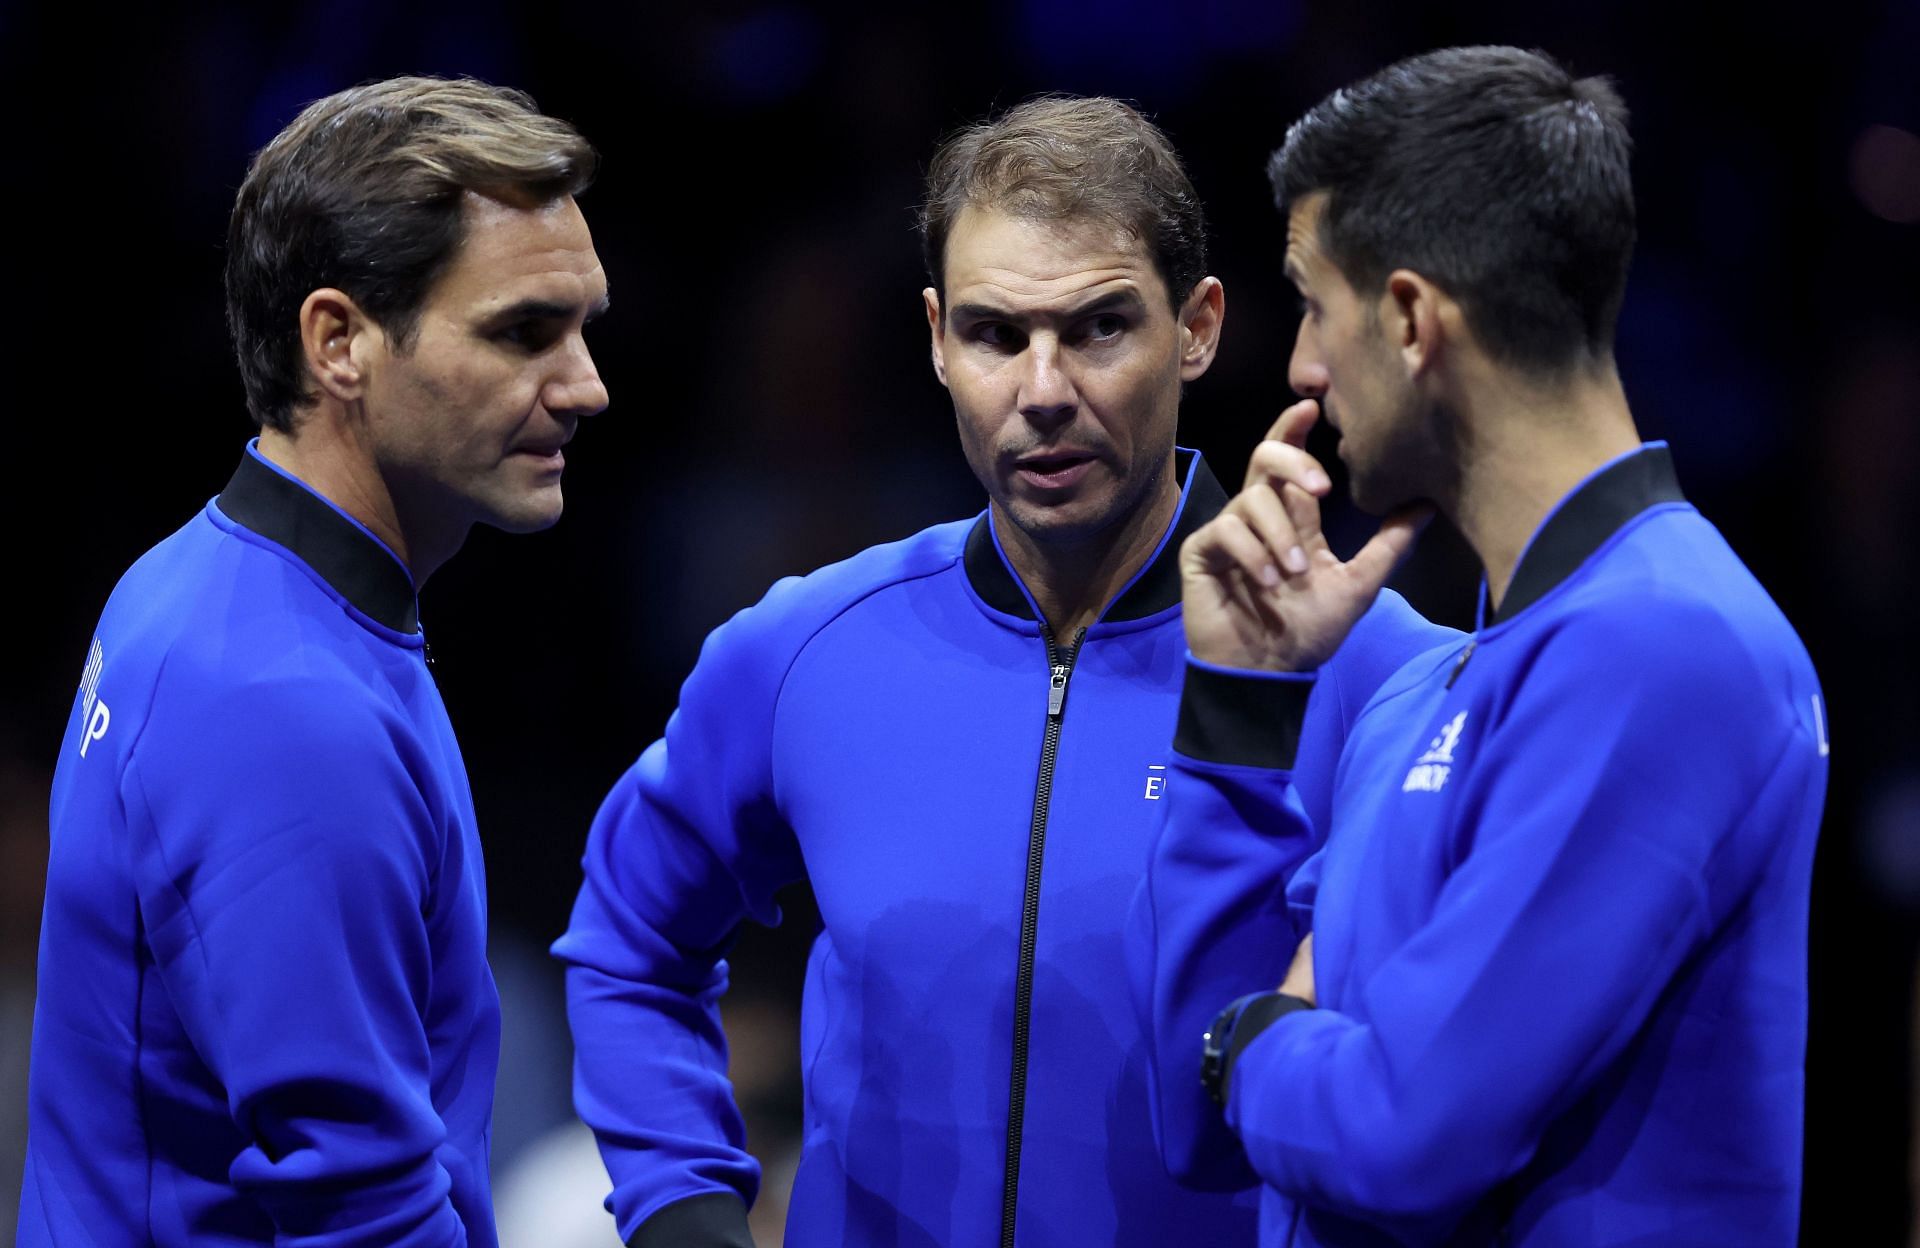 The Big 3 at the 2022 Laver Cup in London.